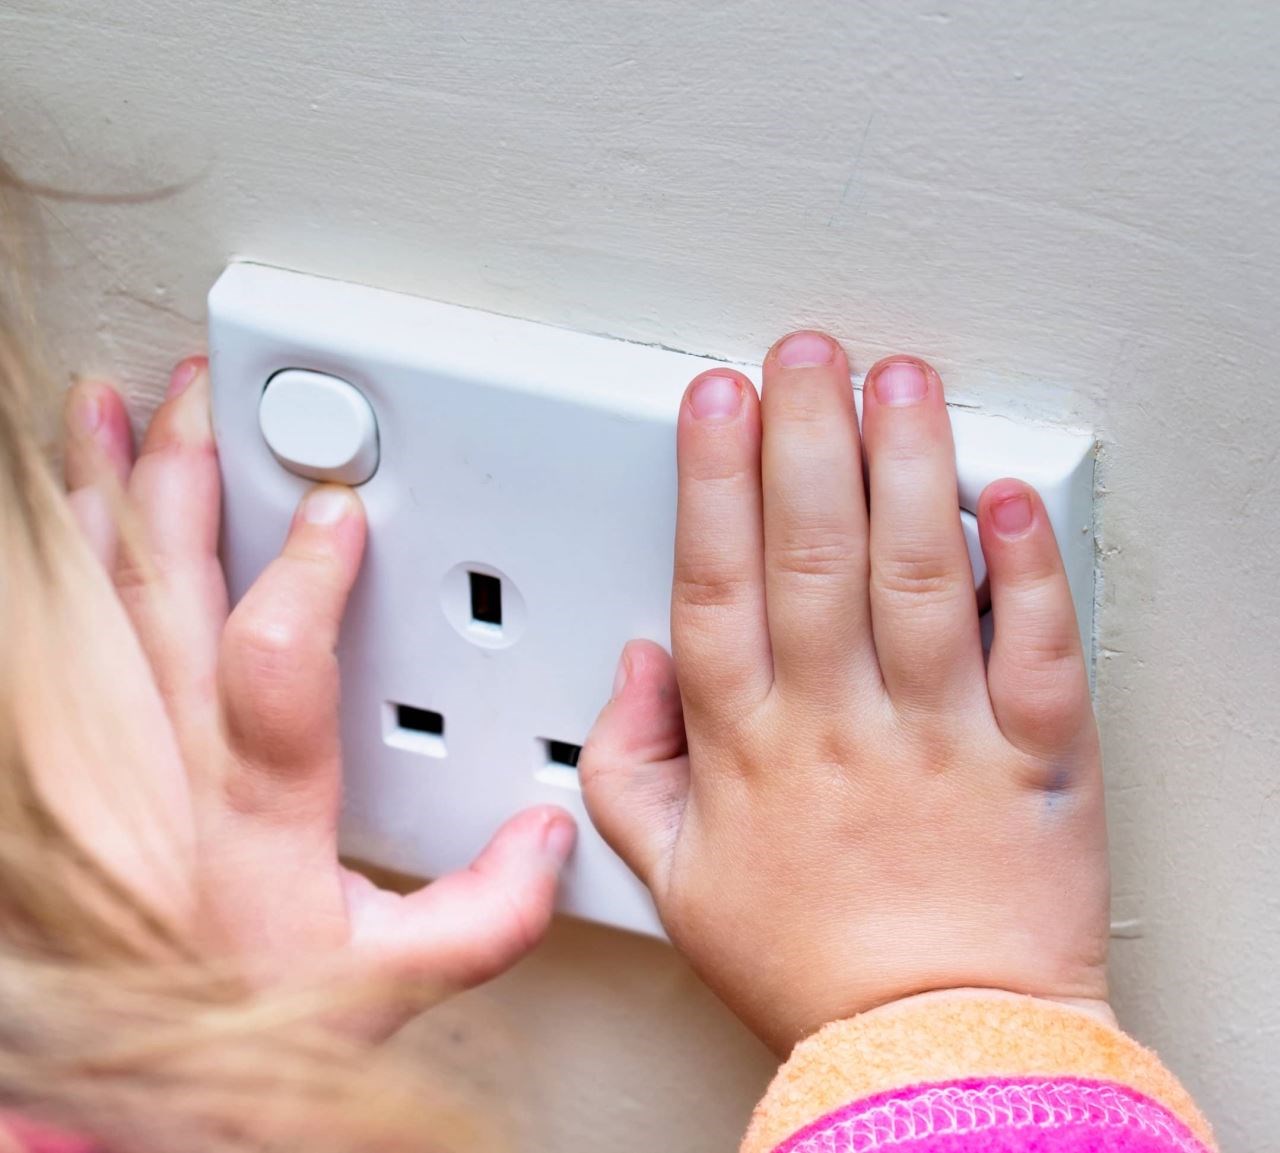 Top tips for keeping children safe from faulty electrics